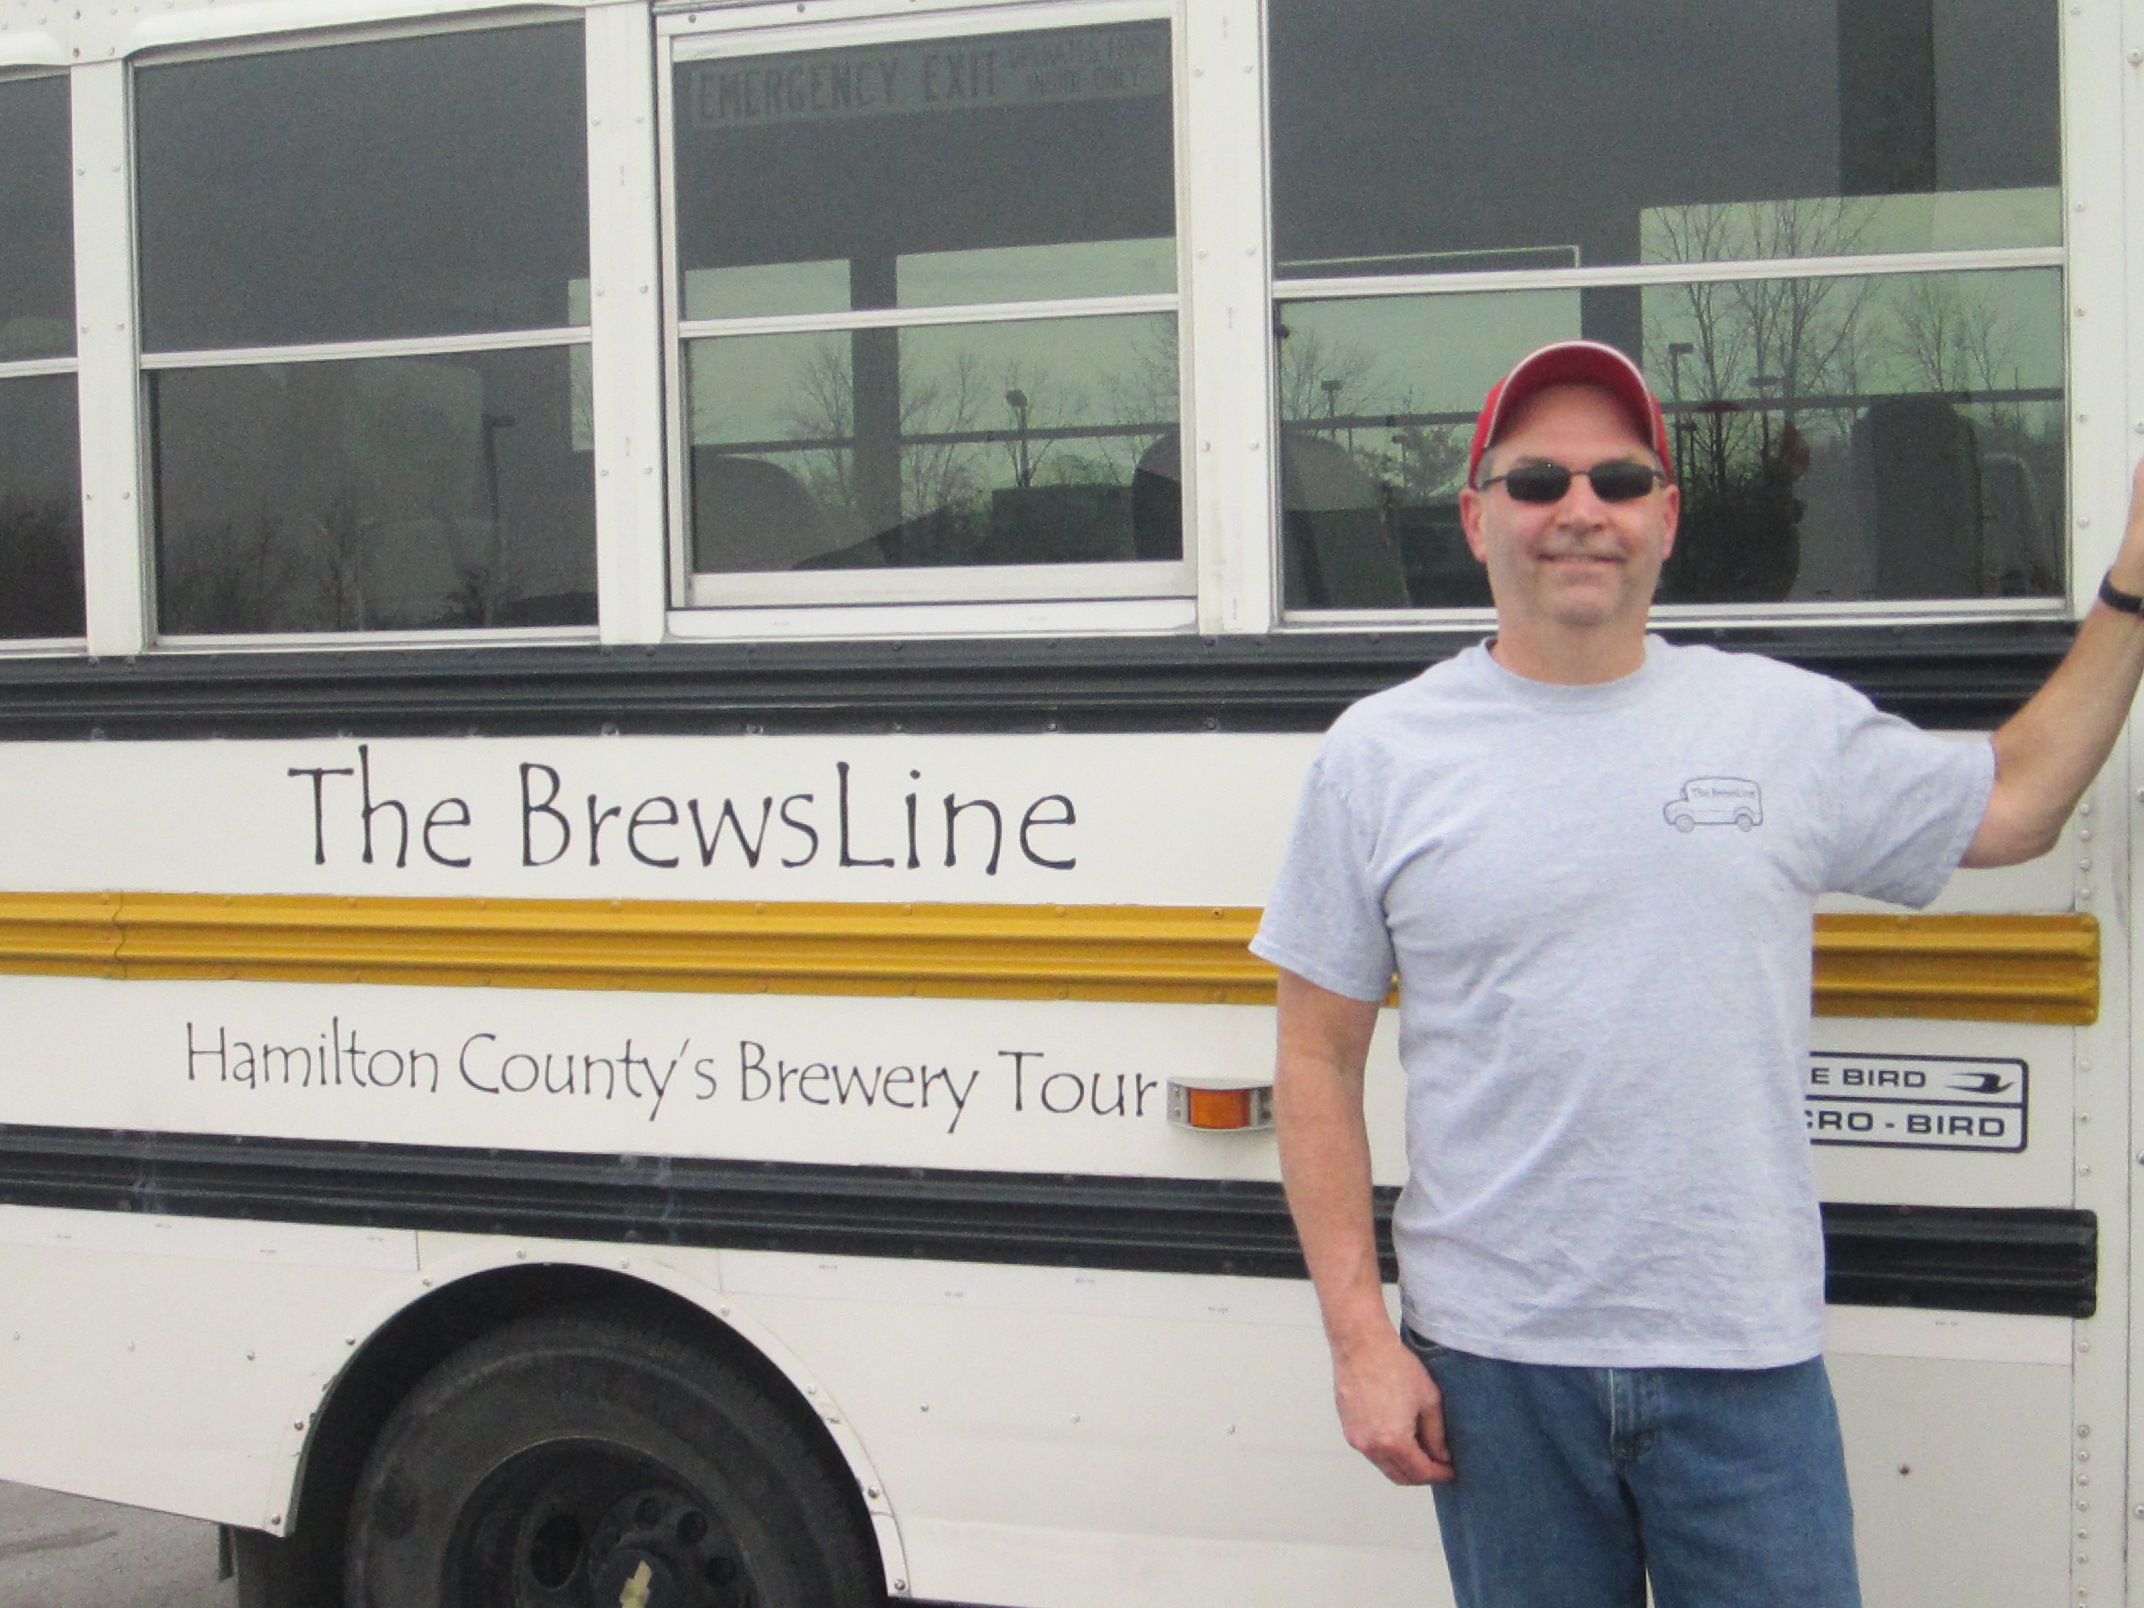 New to Hamilton County, The Brewsline is an educational, yet fun, guided bus tour that takes groups of up to eight people to several breweries in the area, including Barley Island, Bier Brewery, Triton Brewing Company, Carmel Upland Brewing Company, Union Brewing Company, and Brooks & Brews. (Photo by Nancy Edwards.)